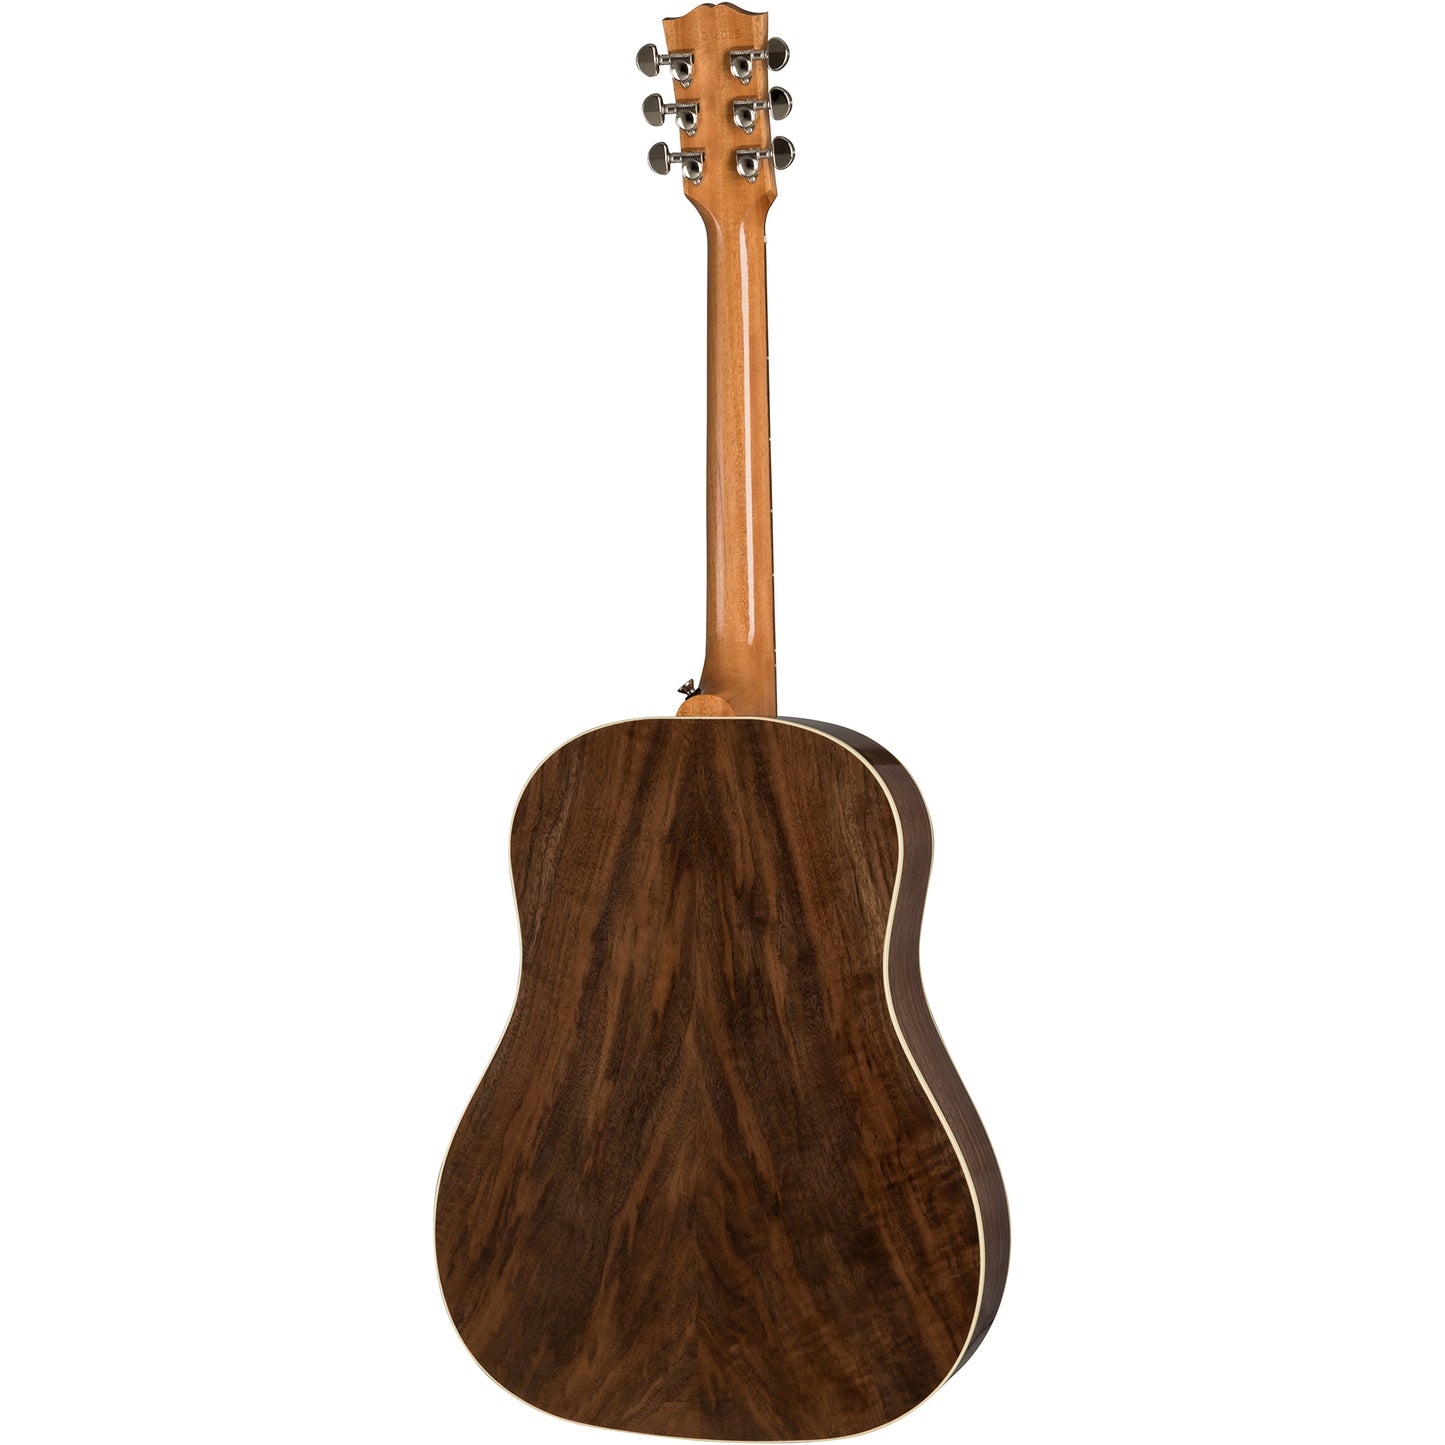 Gibson J-45 Studio Walnut Acoustic Electric Guitar in Antique Natural